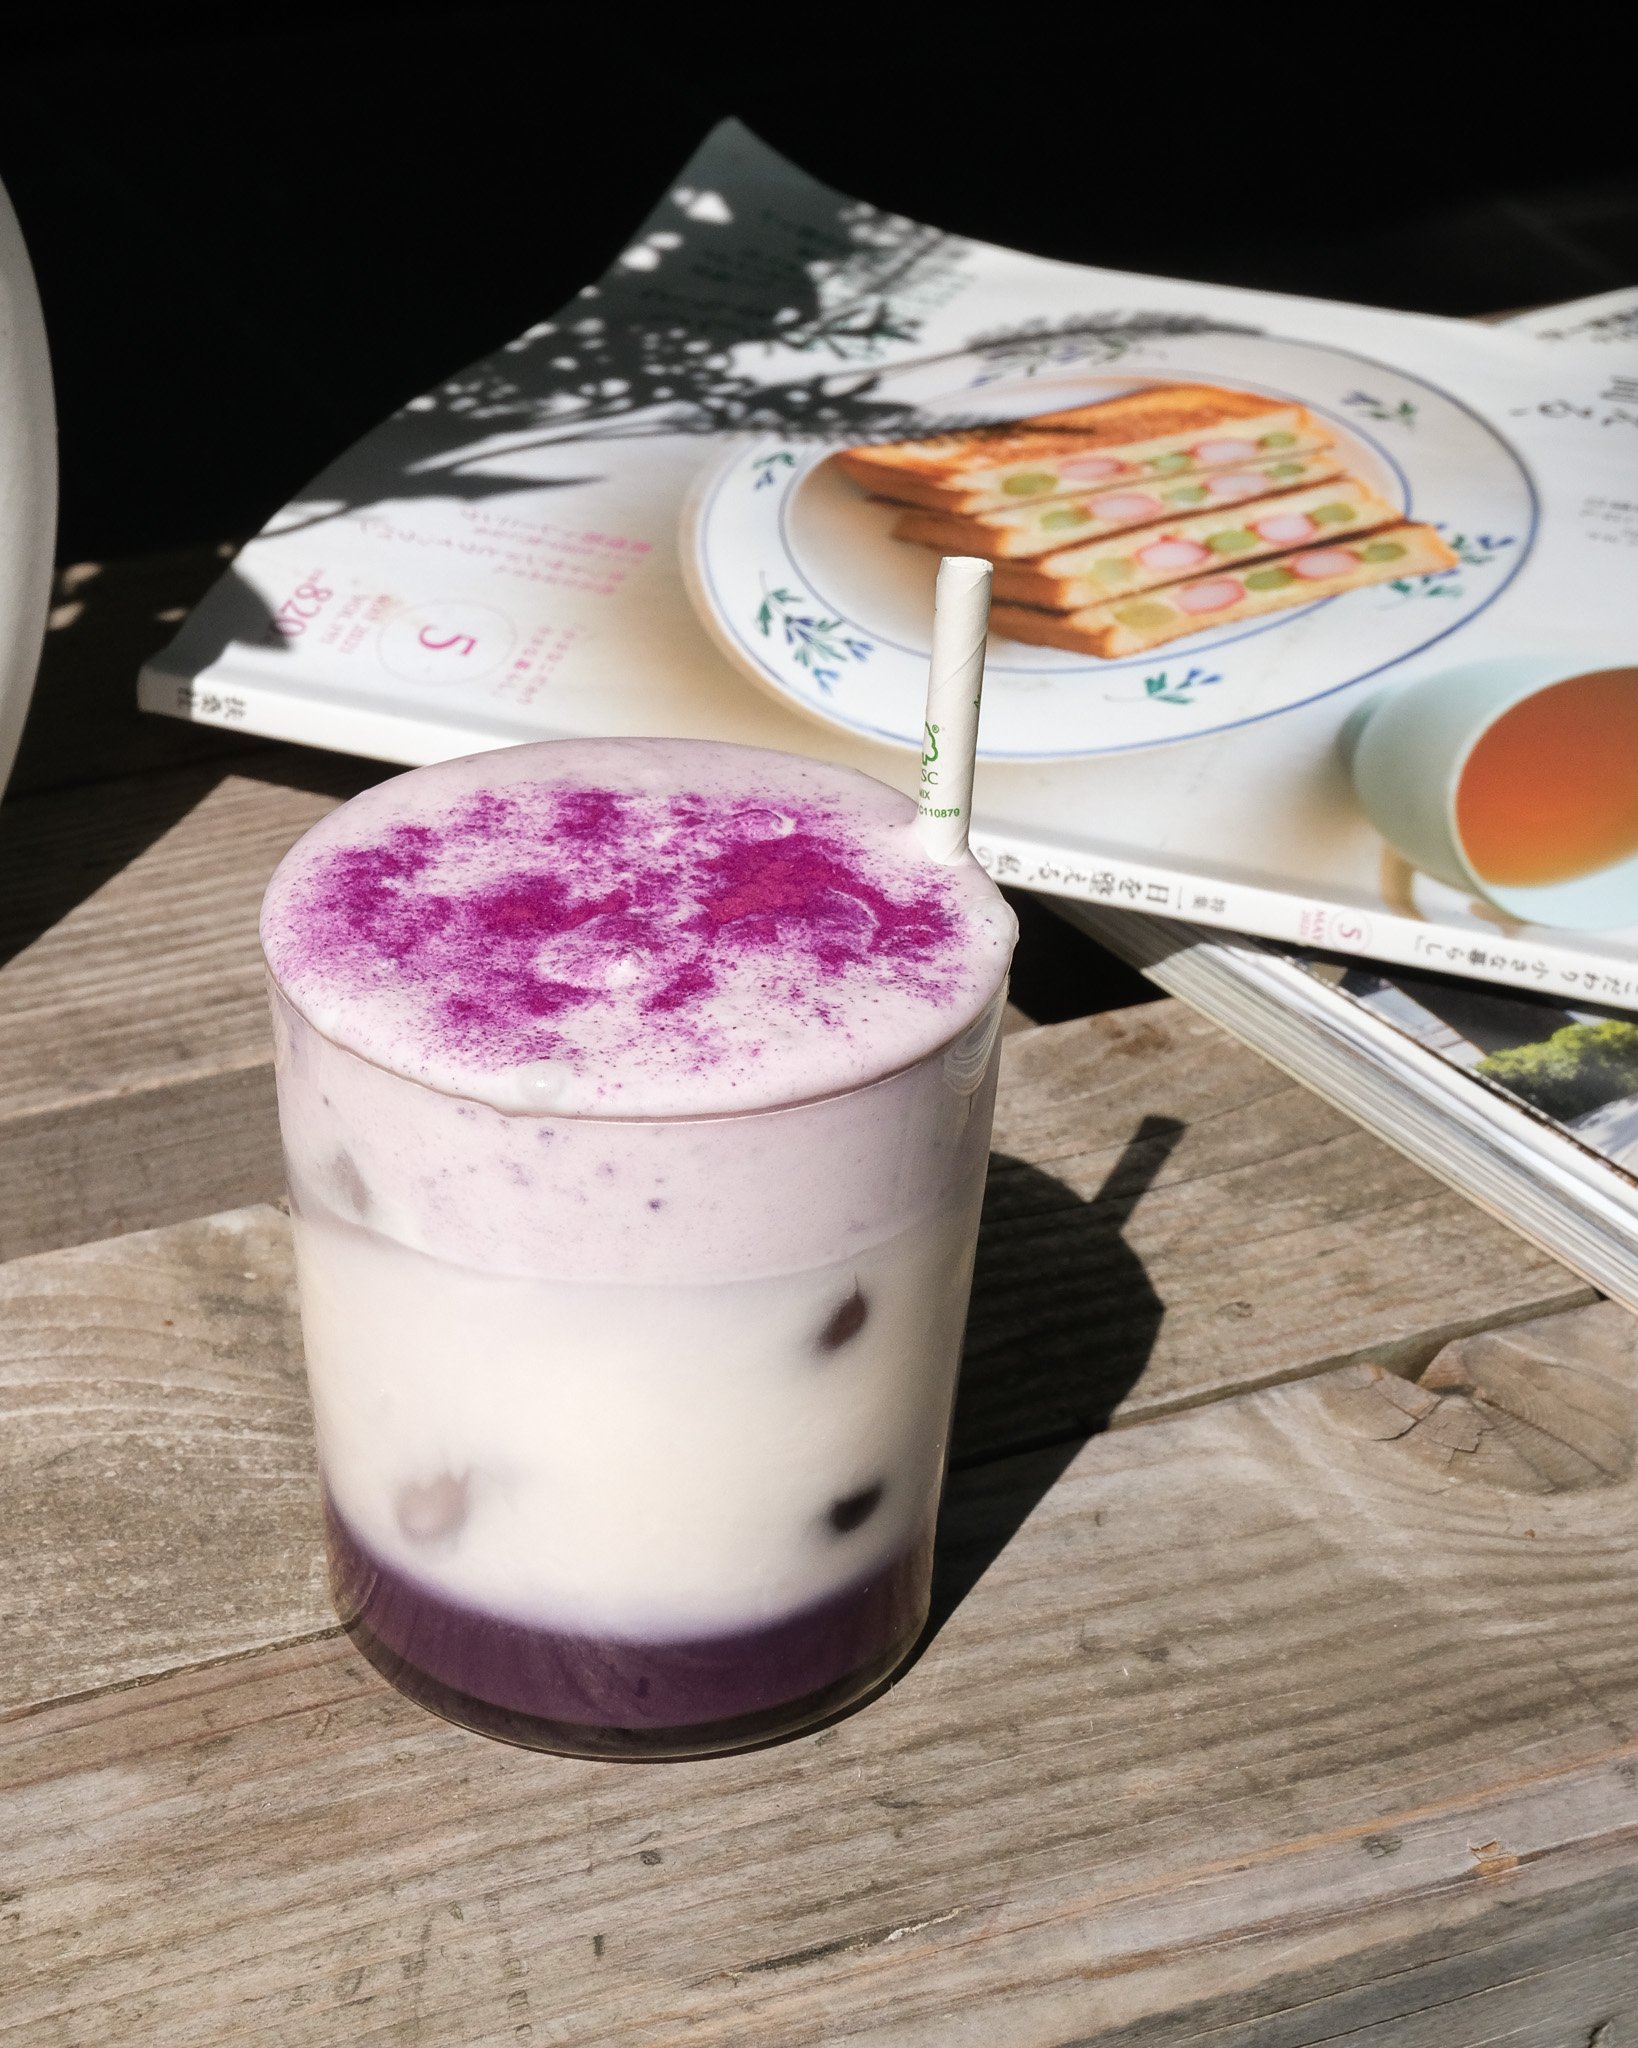 Cheers to a sunny day, fellow Melbournians ~ 🐻☀️
The weather is perfect for a sip of our taro latte! 💜

[Note: This drink is only available in West Melbourne]

See you Fuumis soon! ✨

#melbournecafes #melbourneeats #melbournefoodie